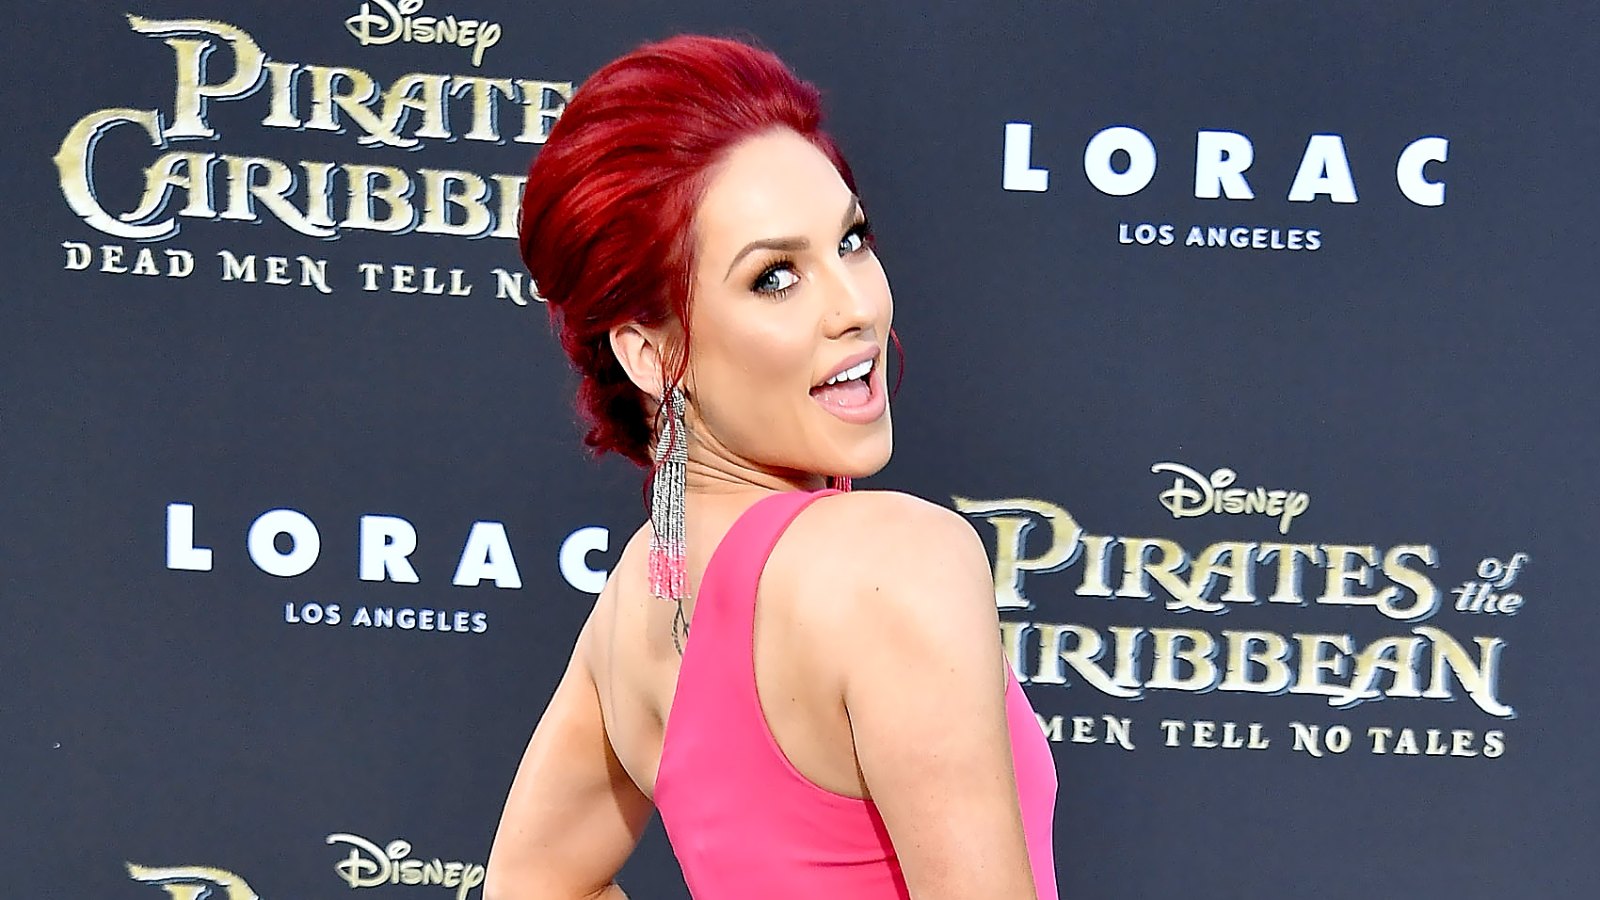 Sharna Burgess arrives at the premiere of Disney's 'Pirates of the Caribbean: Dead Men Tell No Tales' at Dolby Theatre in Hollywood on May 18, 2017.